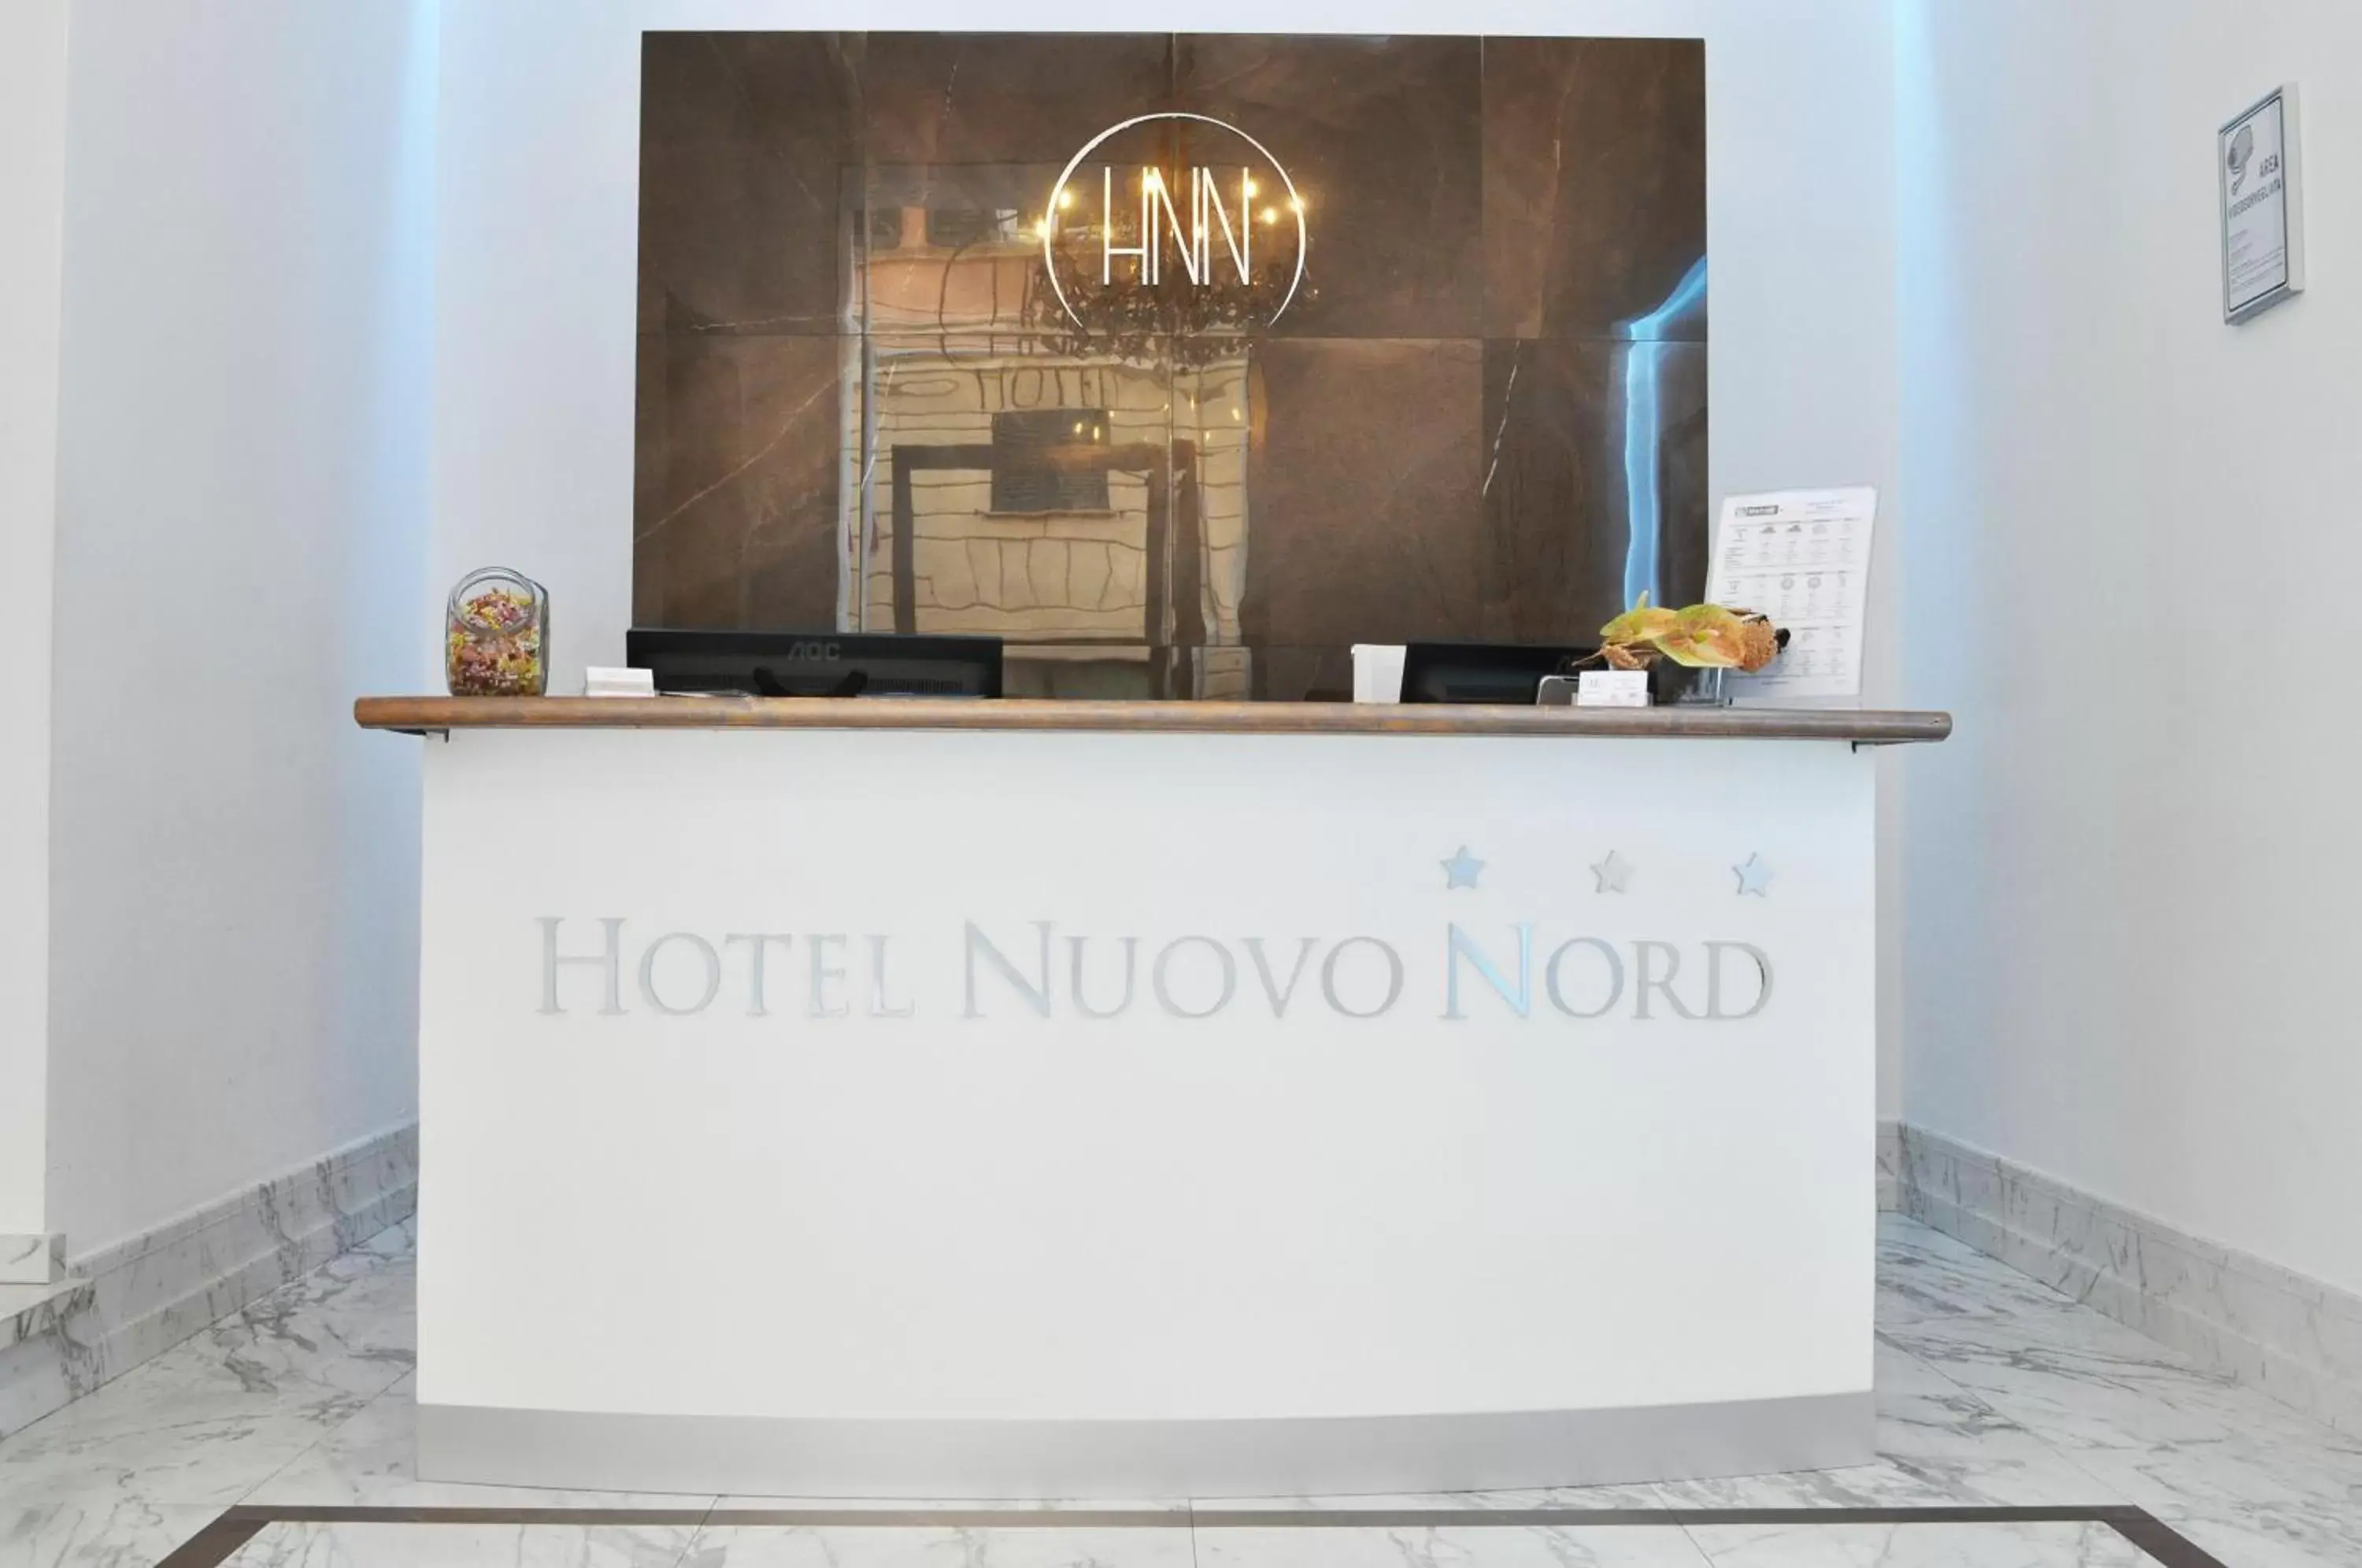 Property logo or sign, Lobby/Reception in Hotel Nuovo Nord